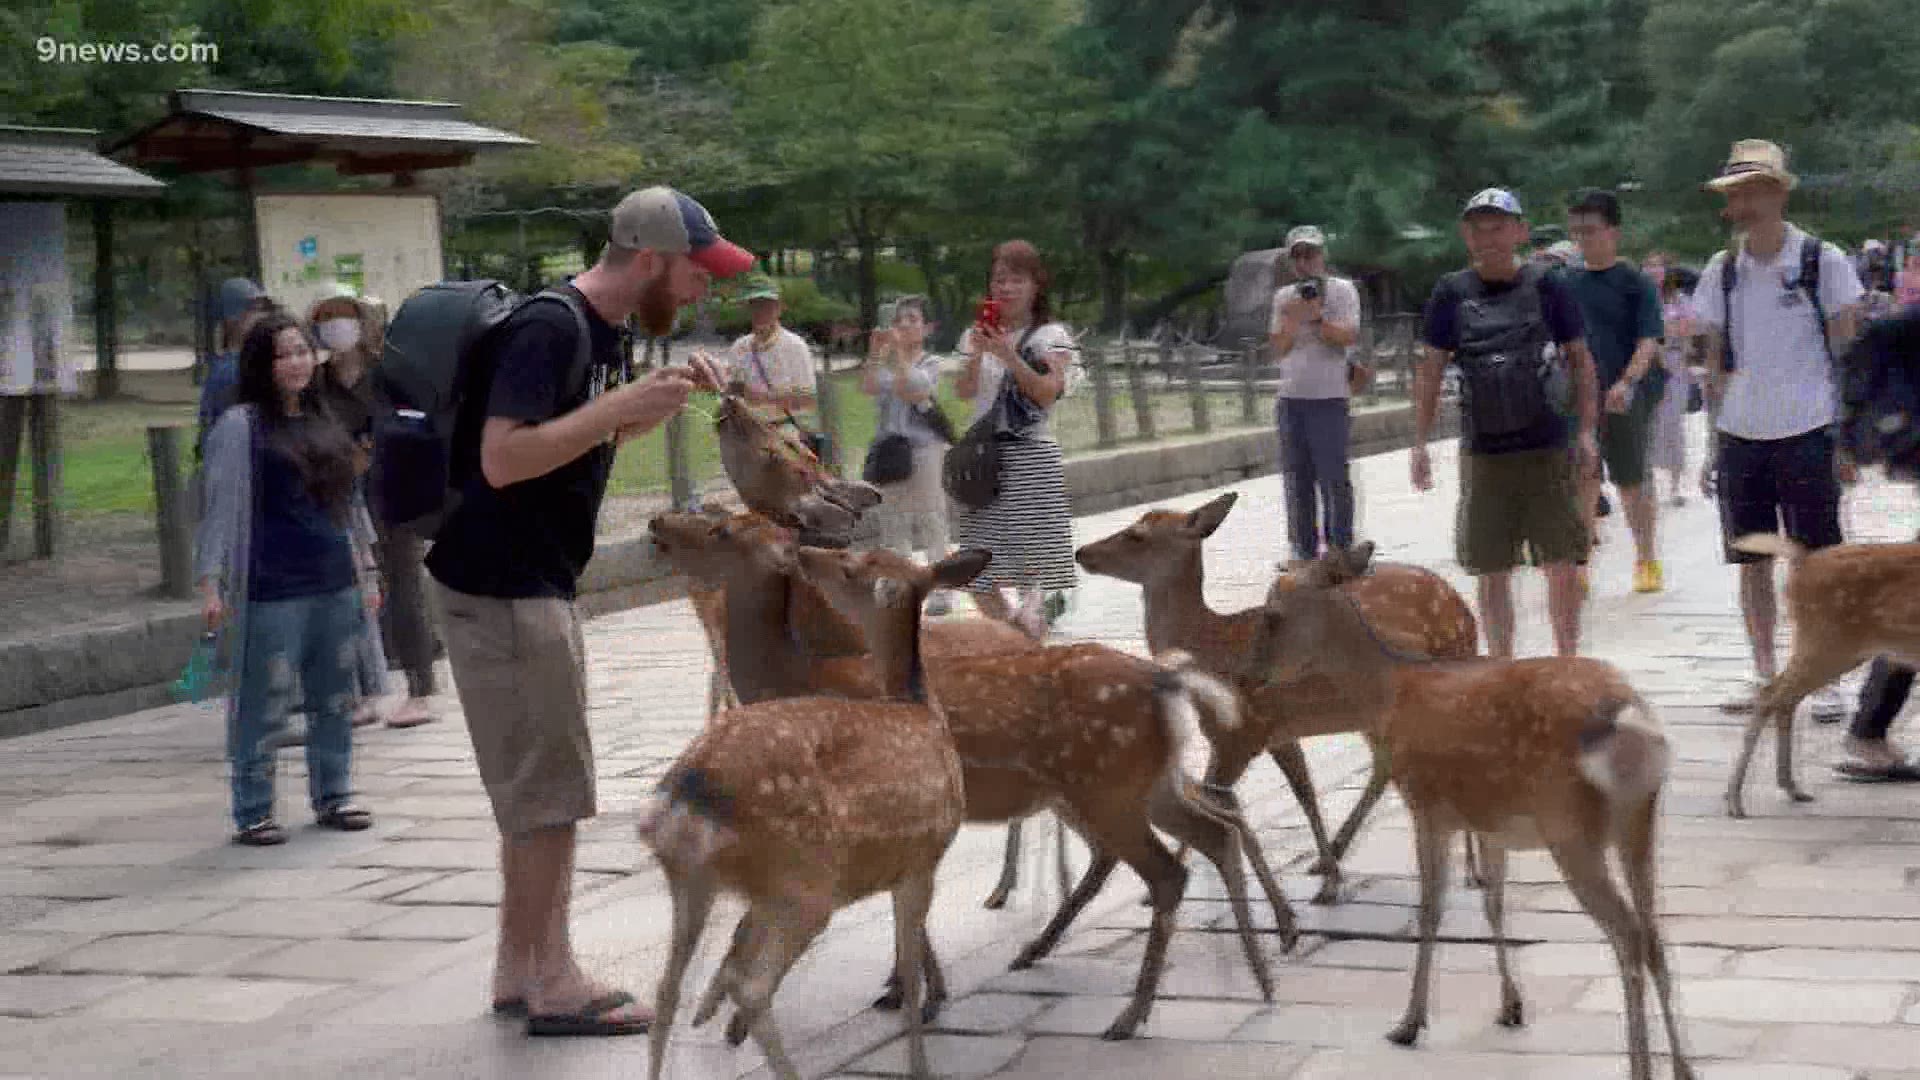 Nara Park or Deer Park in Japan is home to 1,400 wild deer – legend says one of the gods traveled to Nara 1,200 years ago on a white deer.